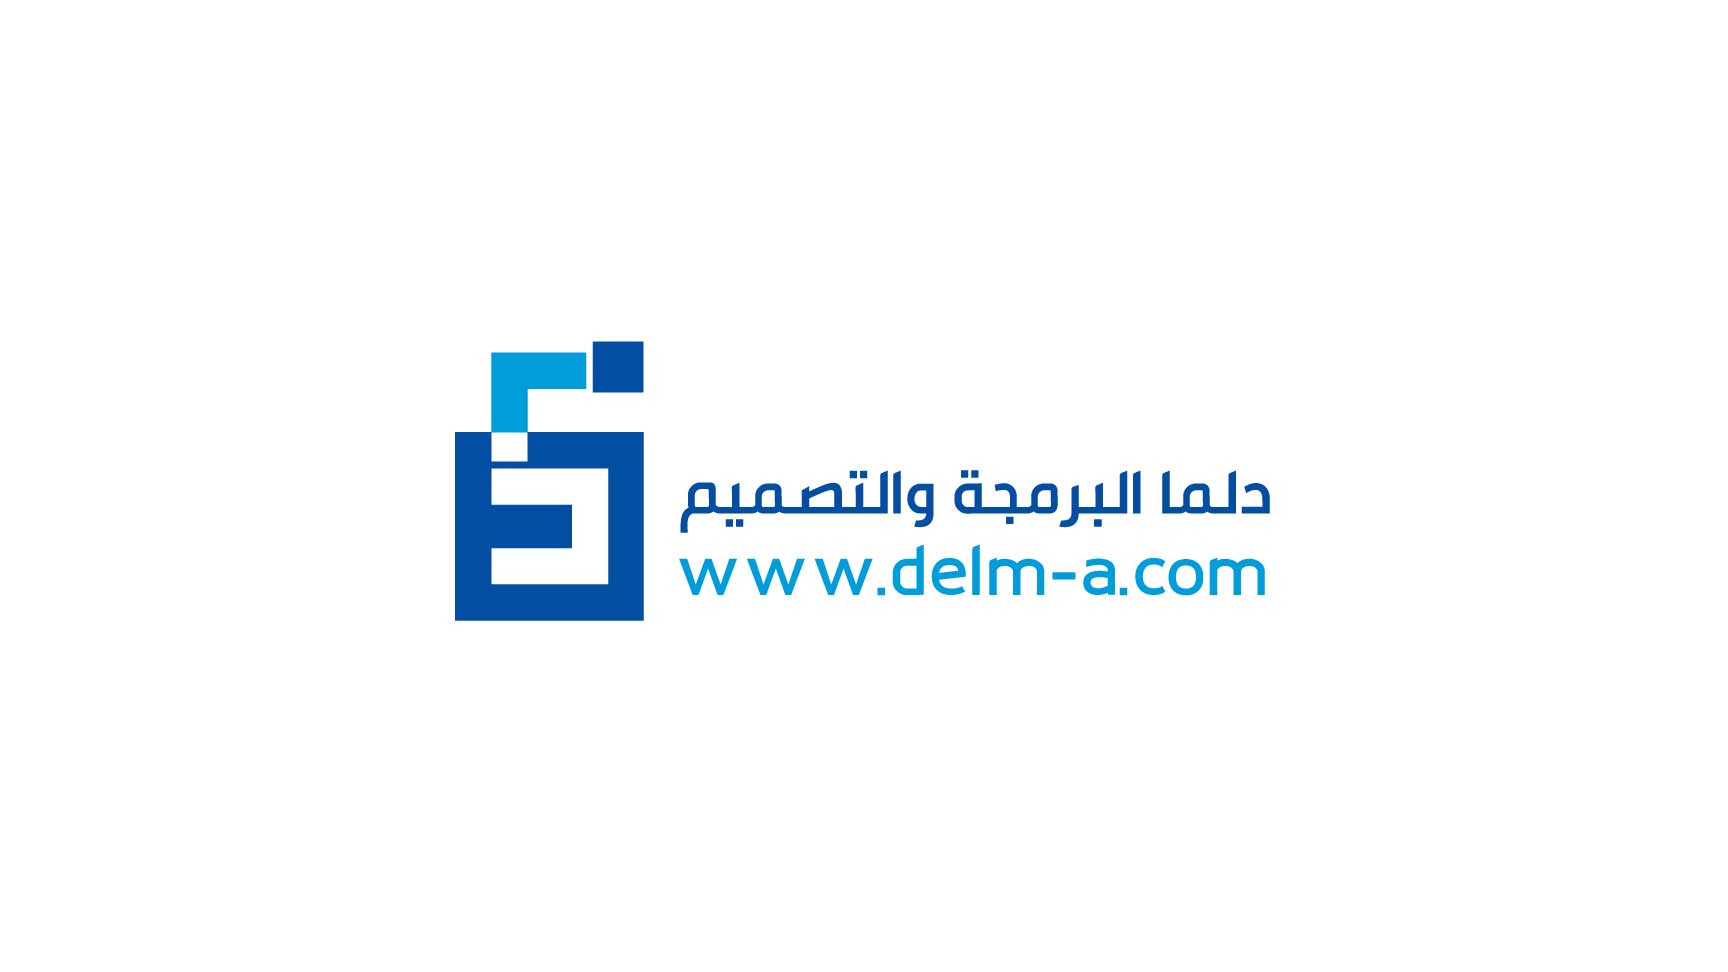 Delma company for designs,websites, domains and web hosting